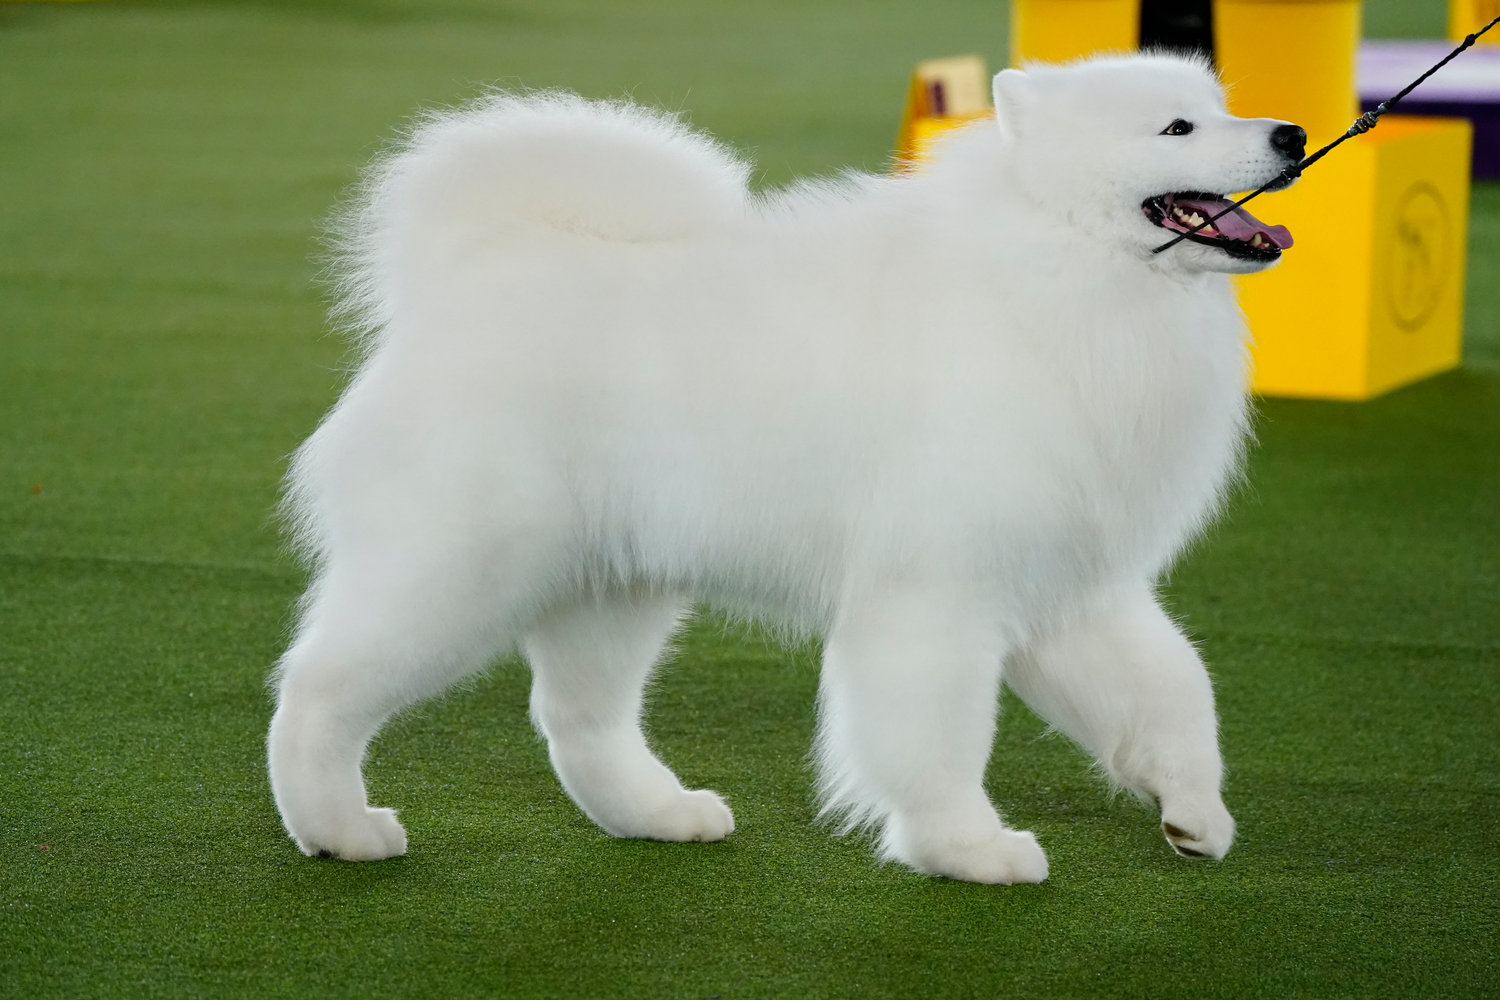 Striker, a Samoyed, competes in the working group at the 146th Westminster Kennel Club Dog Show, Wednesday, June 22, 2022, in Tarrytown, N.Y. Striker won the group. (AP Photo/Frank Franklin II)